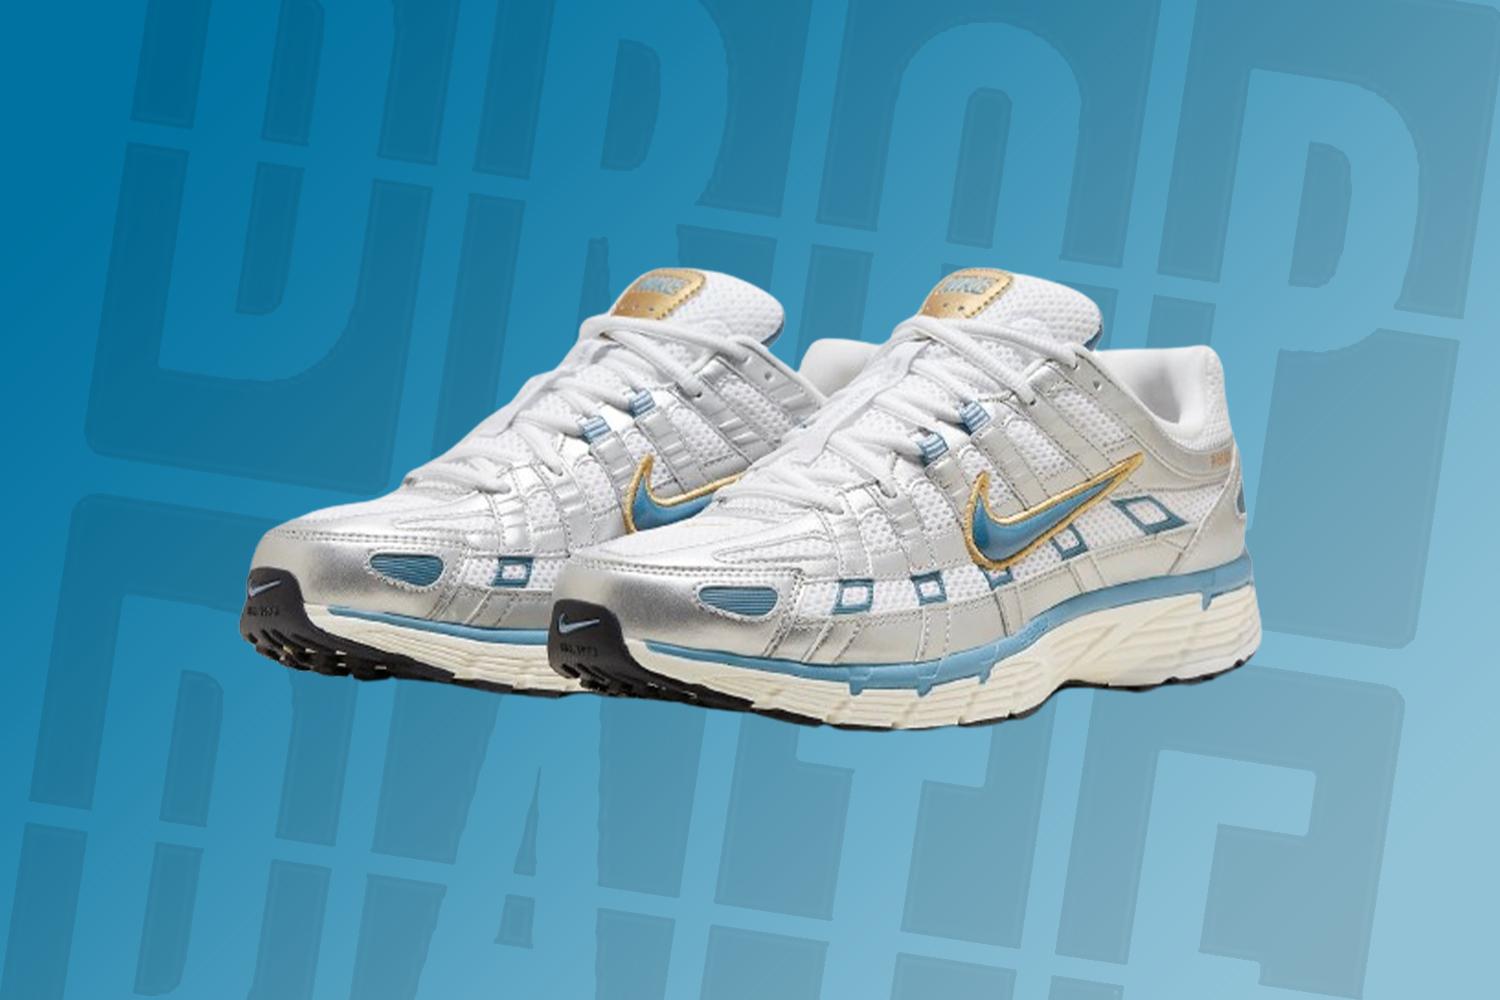 Introducing the Nike P-6000 ‘White/Aegean Storm’